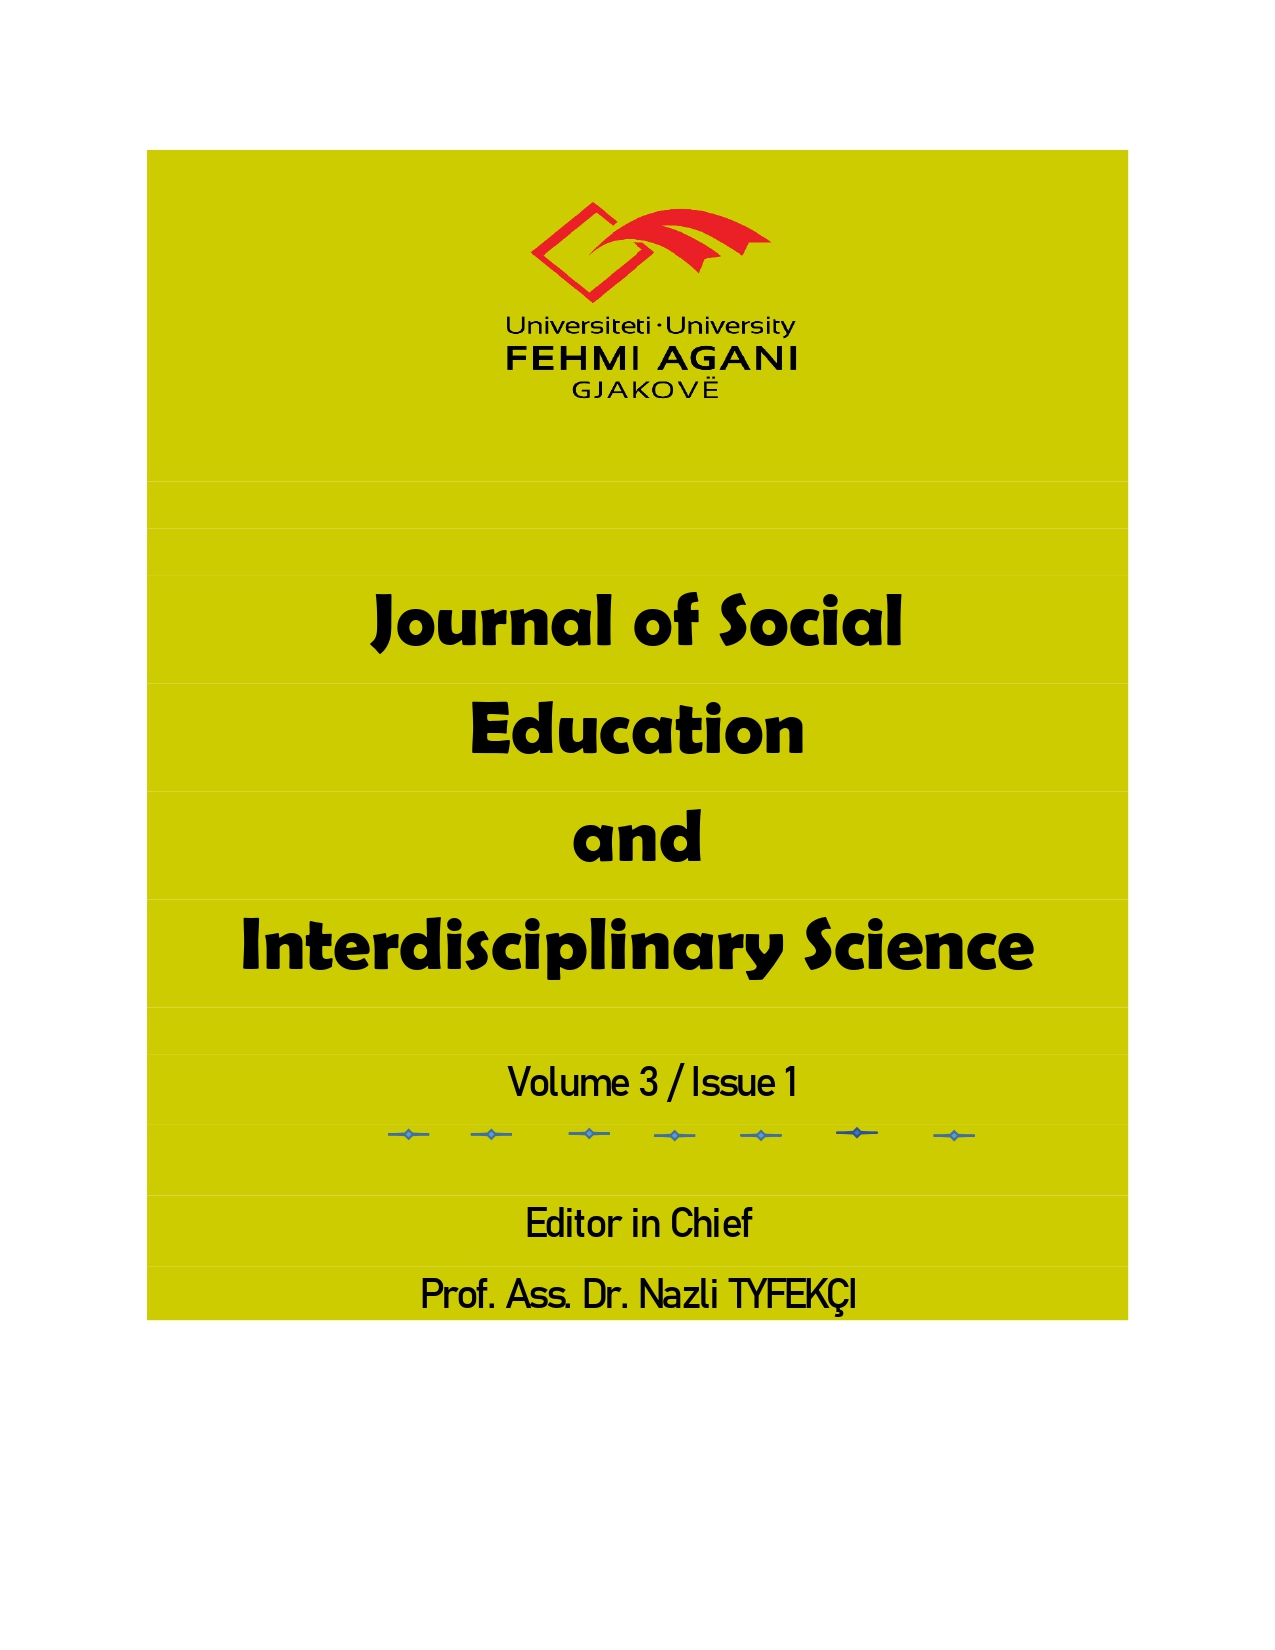 					View Vol. 3 No. 1 (2022): JOURNAL OF SOCIAL EDUCATION AND INTERDISCIPLINARY SCIENCE, VOLUME 3, ISSUE 1
				